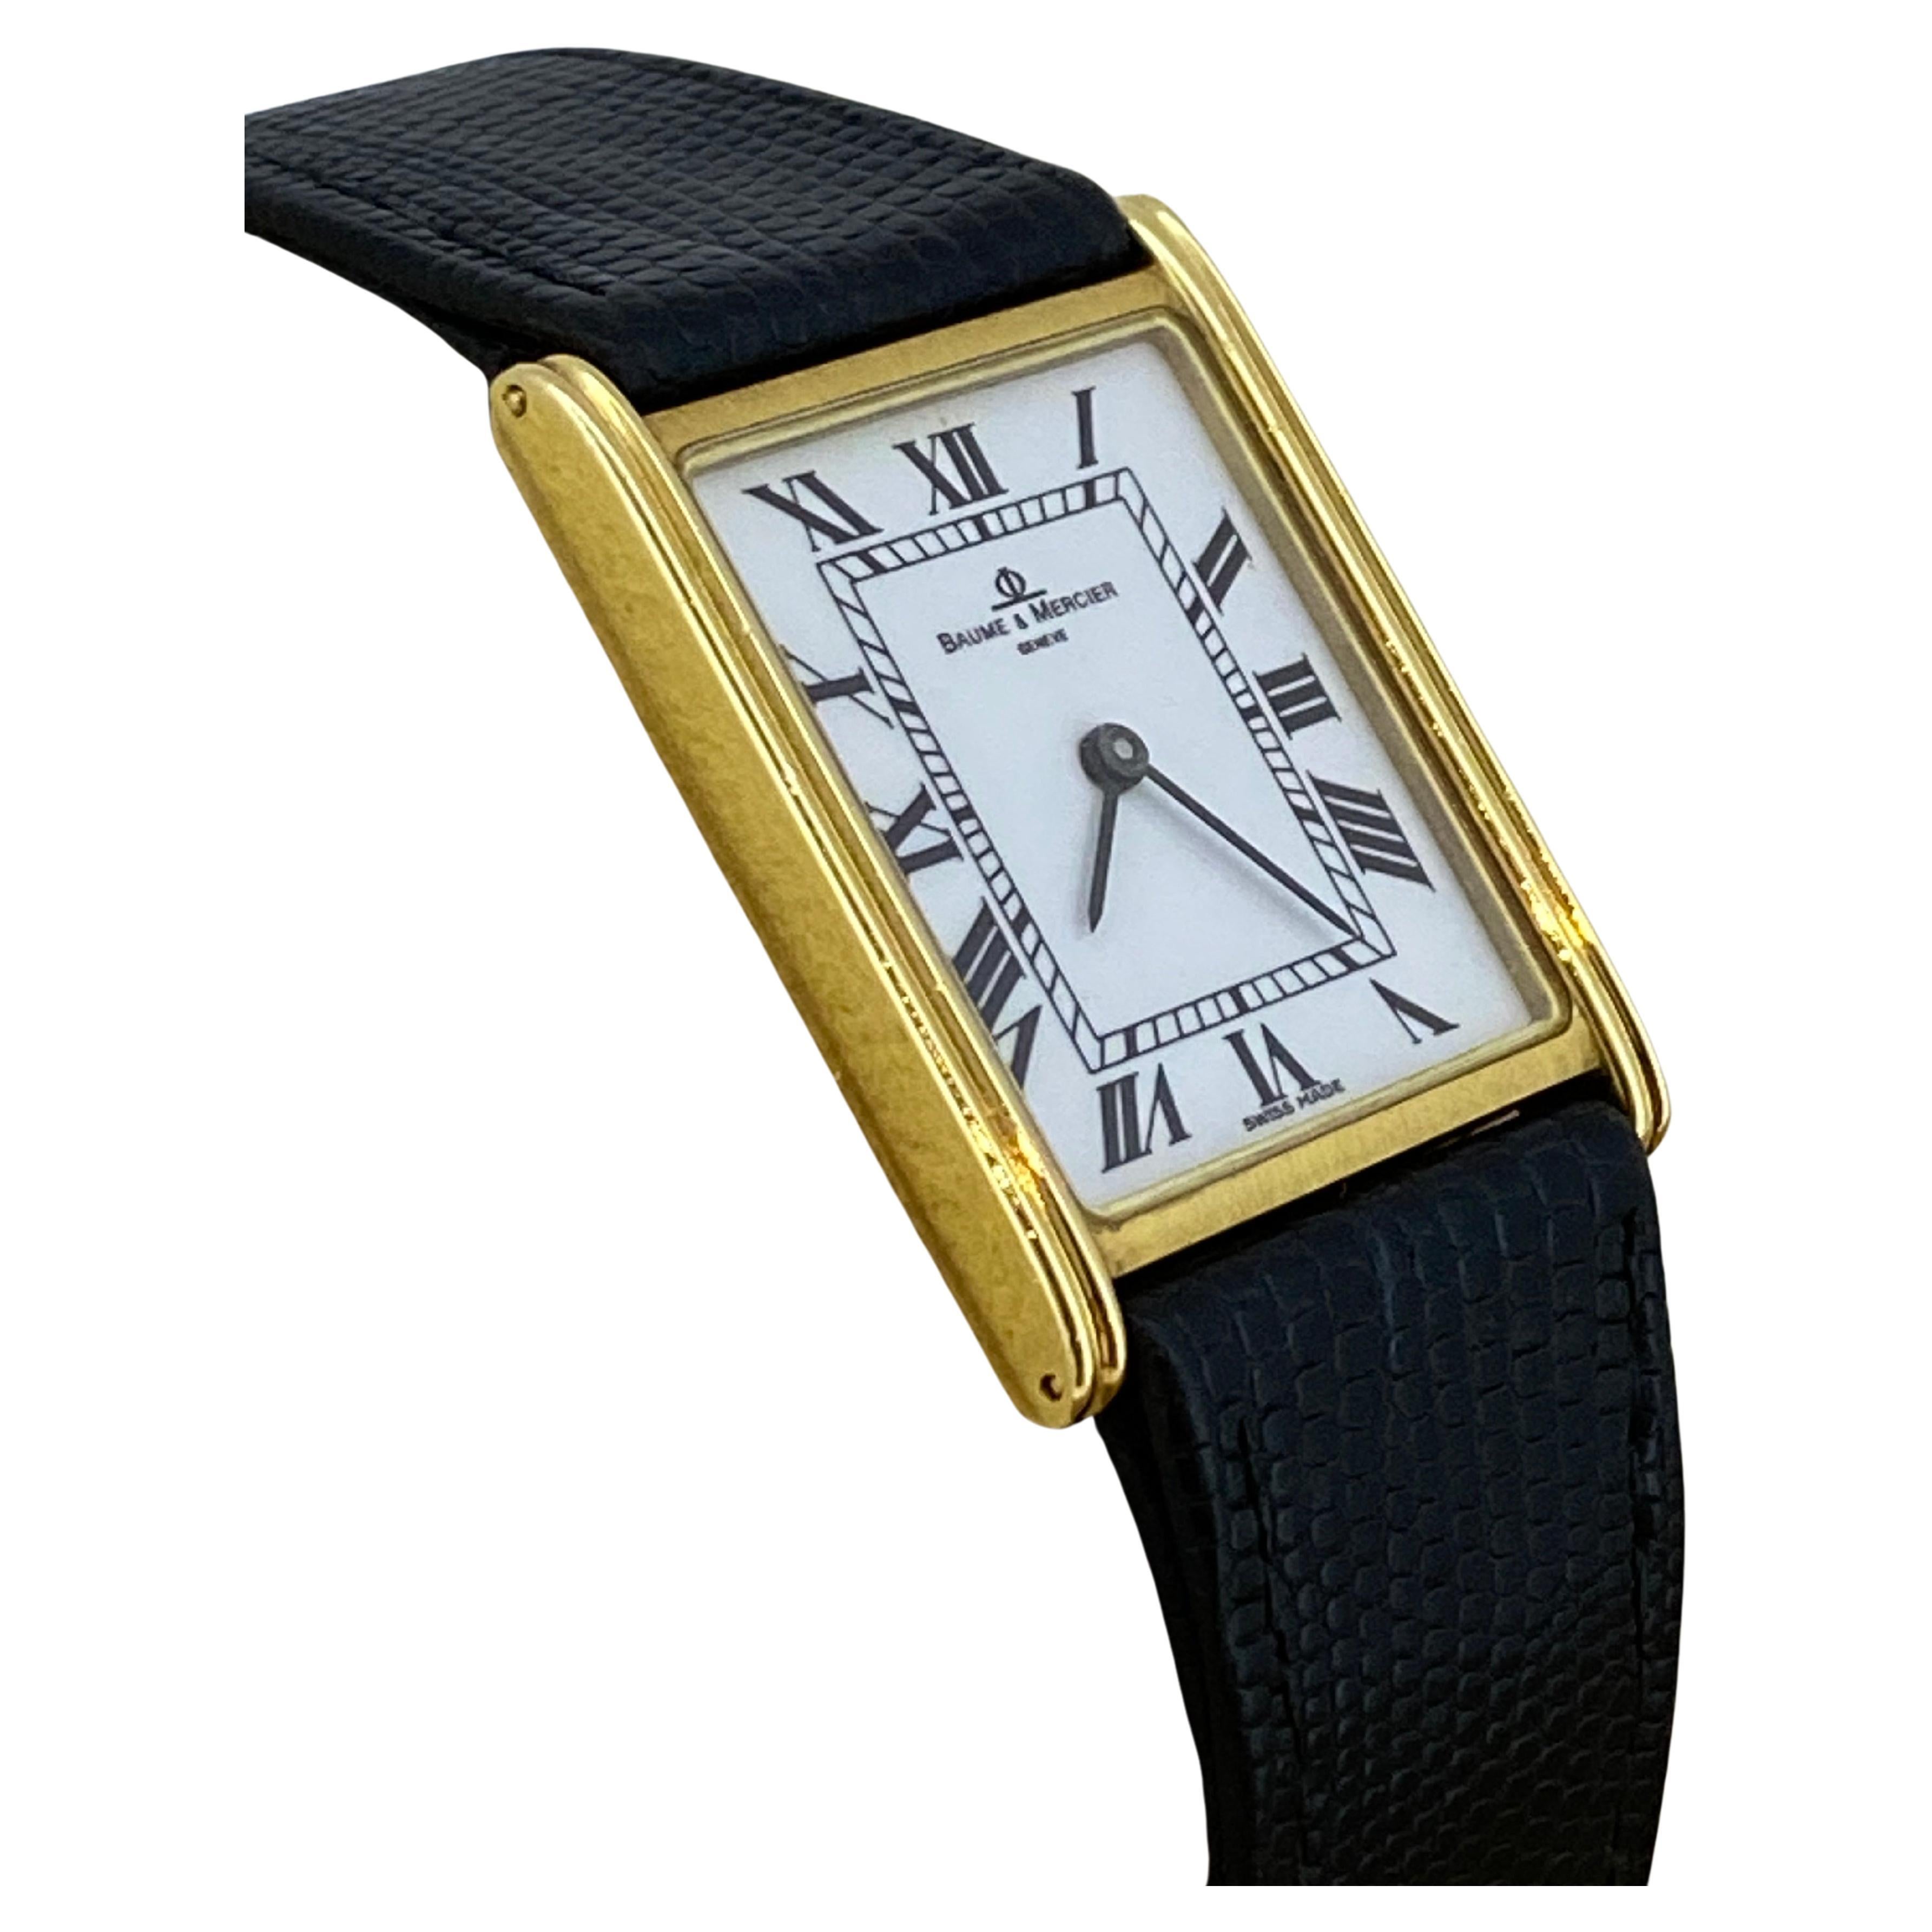 Being one of the most coveted & desirable timepieces, 

this elegant 18K Gold Baume & Mercier Geneve, 

ref 1830  

is in great condition & in excellent working order 

 

Dating back to 1980’s, 

yet of timeless design 

this timepiece is a genuine